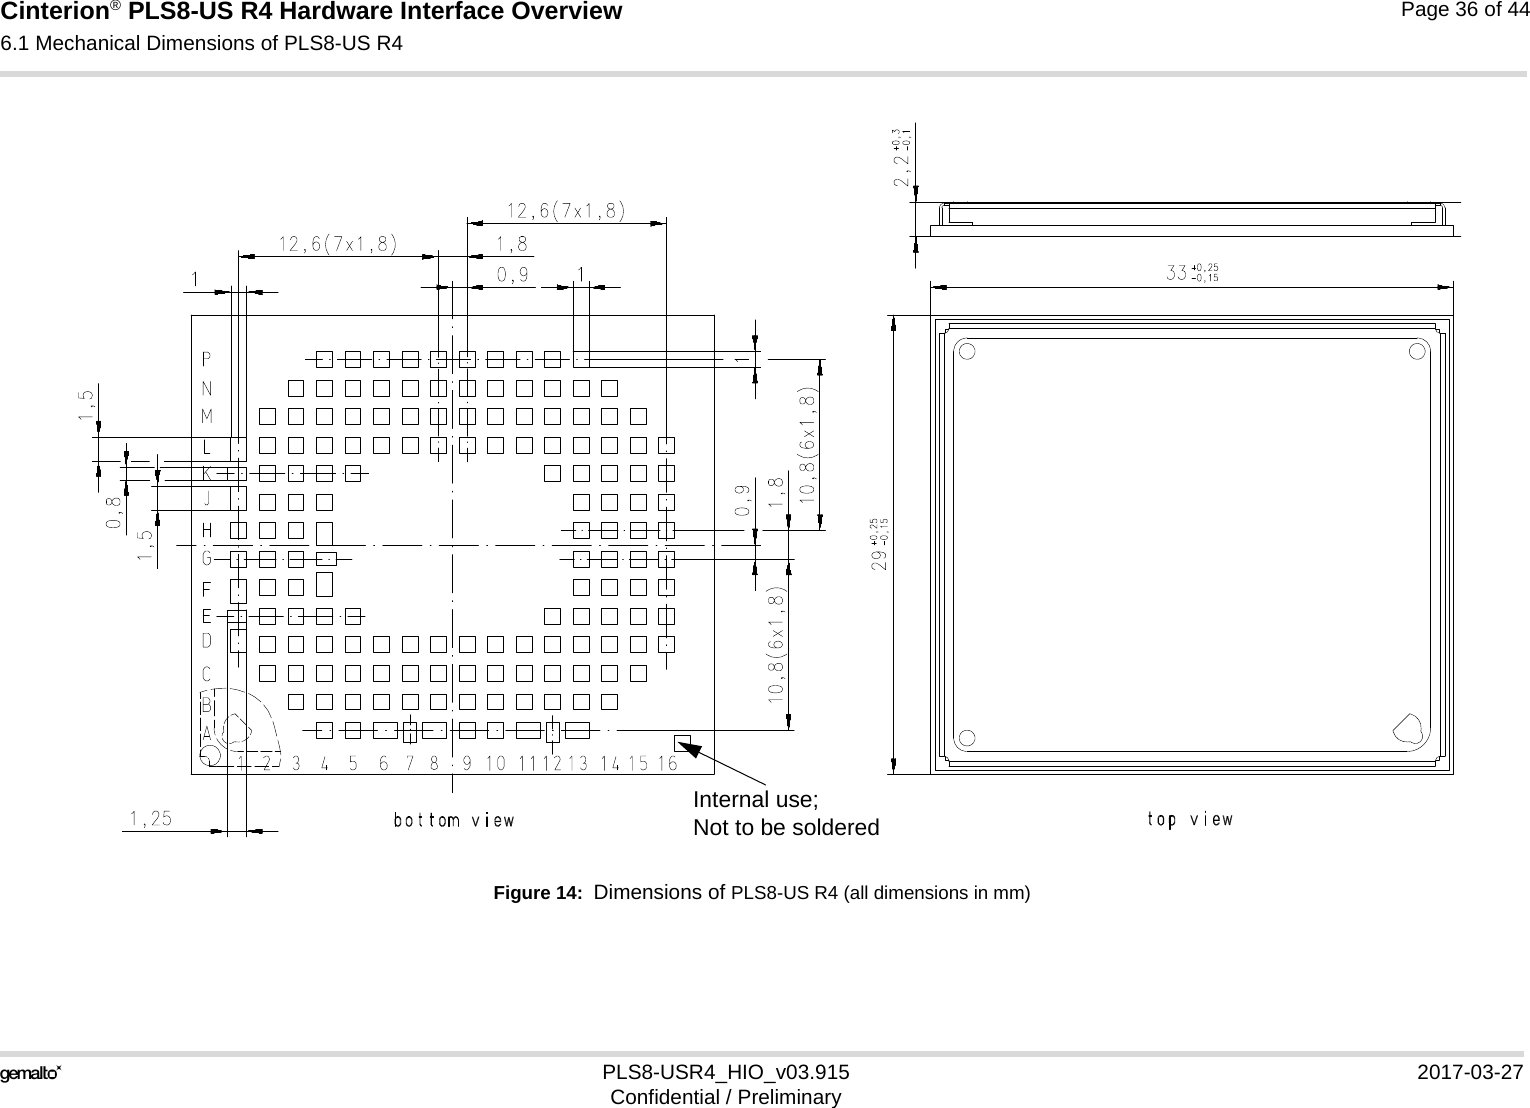 Cinterion® PLS8-US R4 Hardware Interface Overview6.1 Mechanical Dimensions of PLS8-US R436PLS8-USR4_HIO_v03.915 2017-03-27Confidential / PreliminaryPage 36 of 44Figure 14:  Dimensions of PLS8-US R4 (all dimensions in mm)Internal use; Not to be soldered